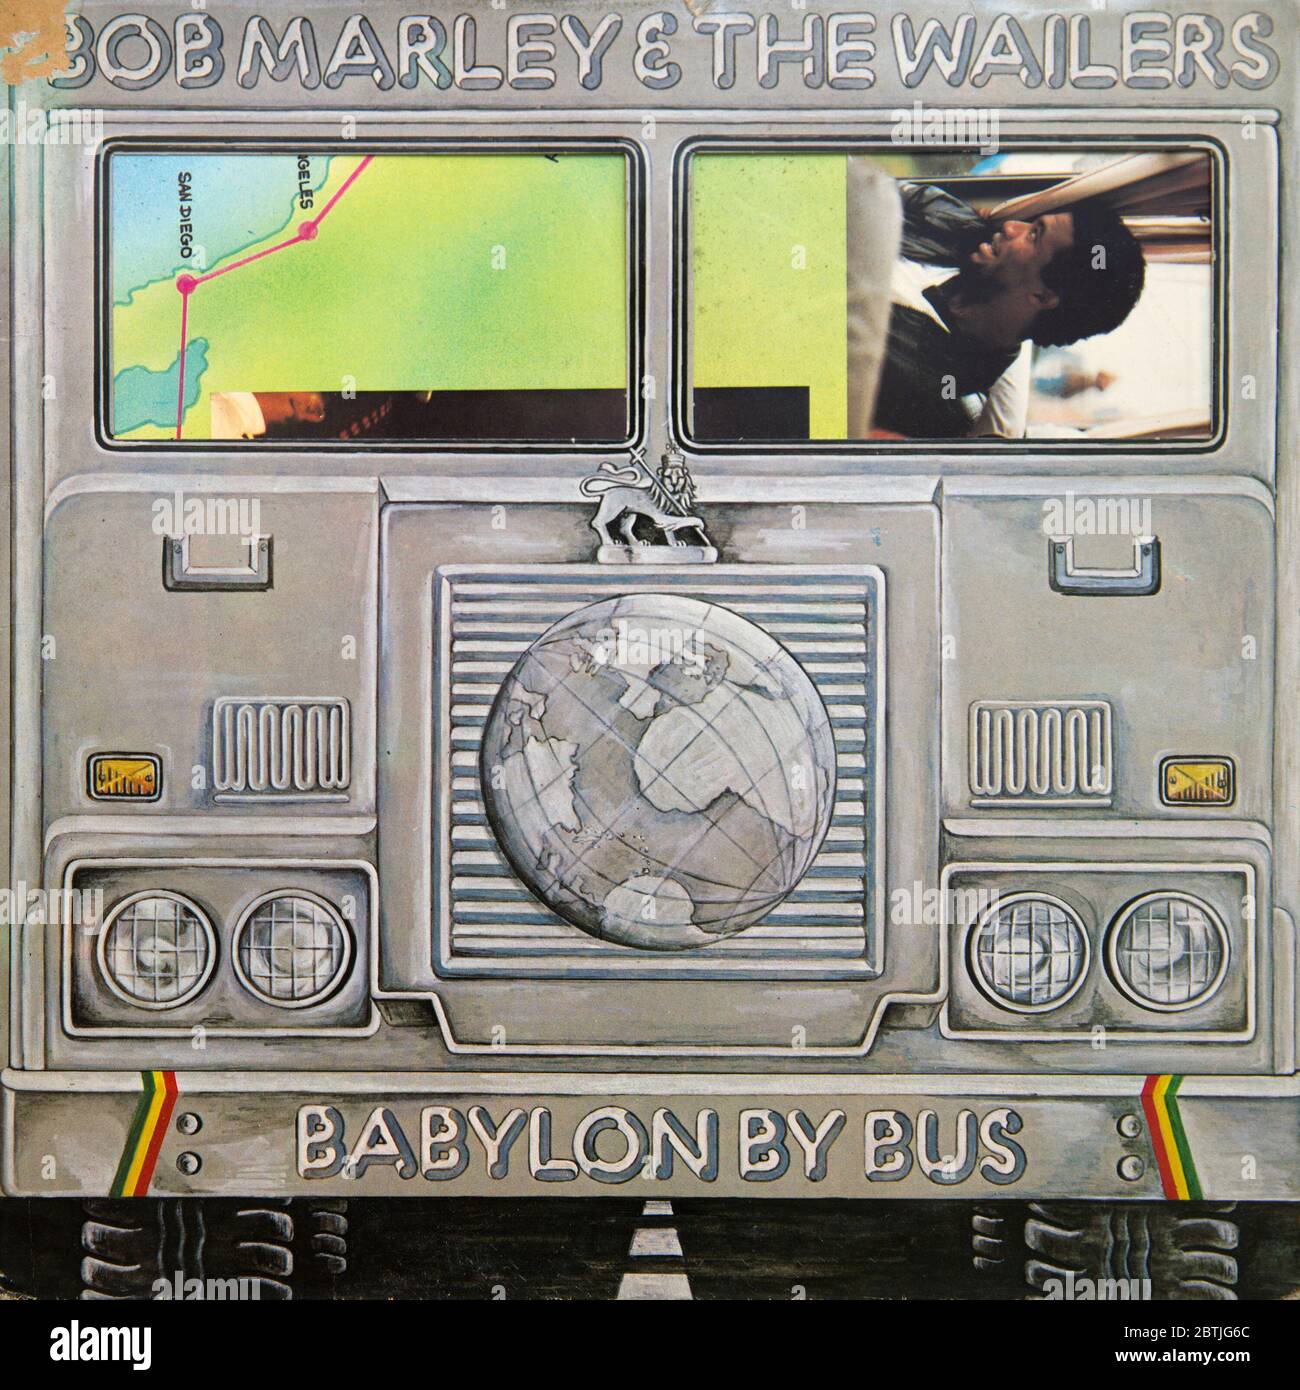 Cover Of Vinyl Album Babylon By Bus By Bob Marley And The Wailers Stock Photo Alamy